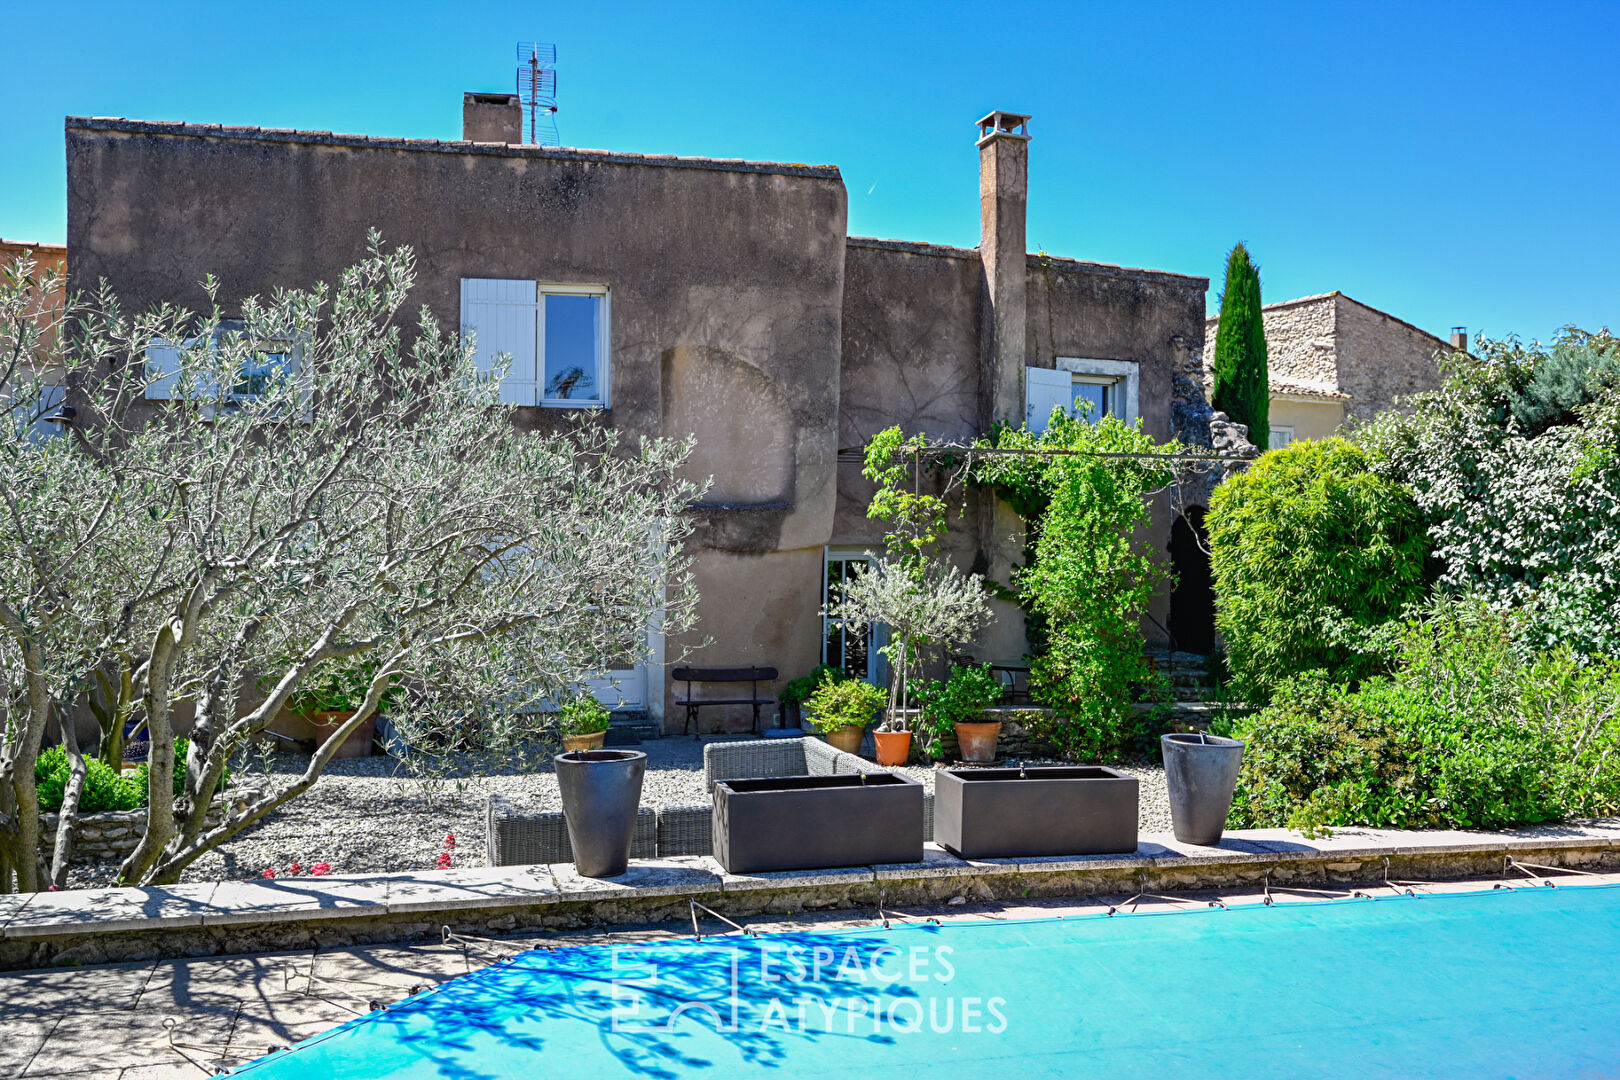 ELEGANT RENOVATION IN THE HEART OF LUBERON